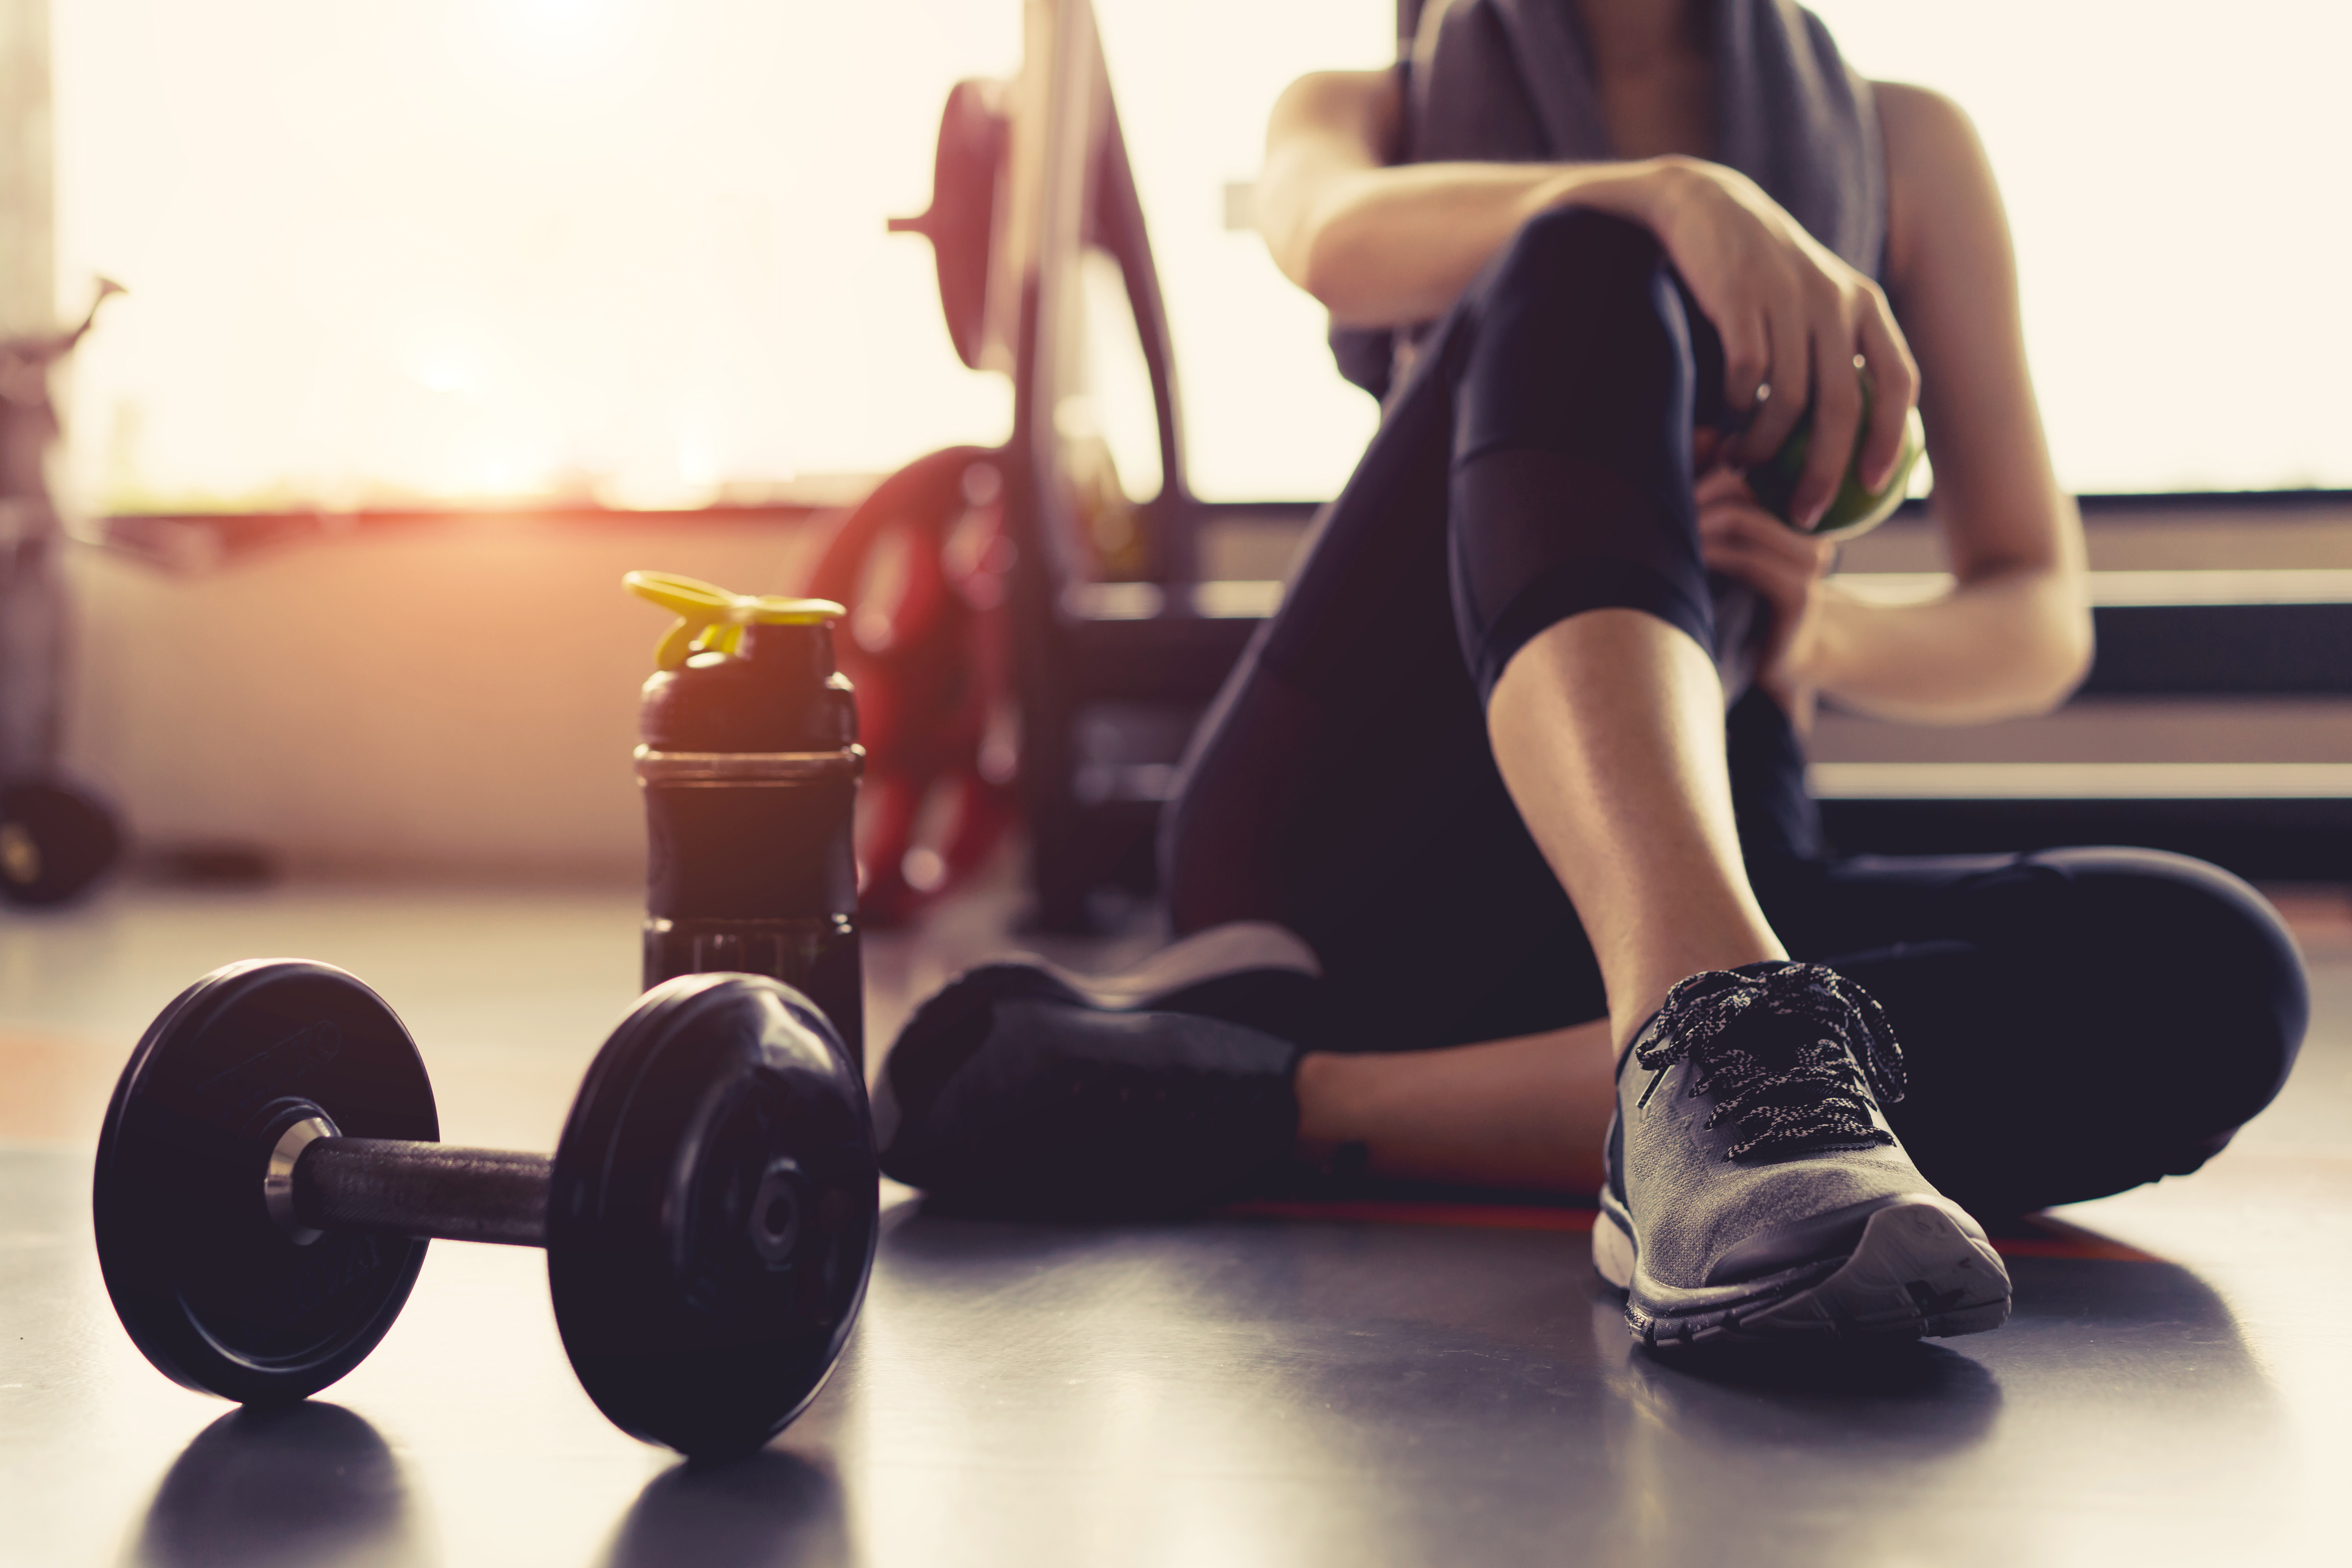 4 Tips to Speed Up Muscle Recovery Post-Workout